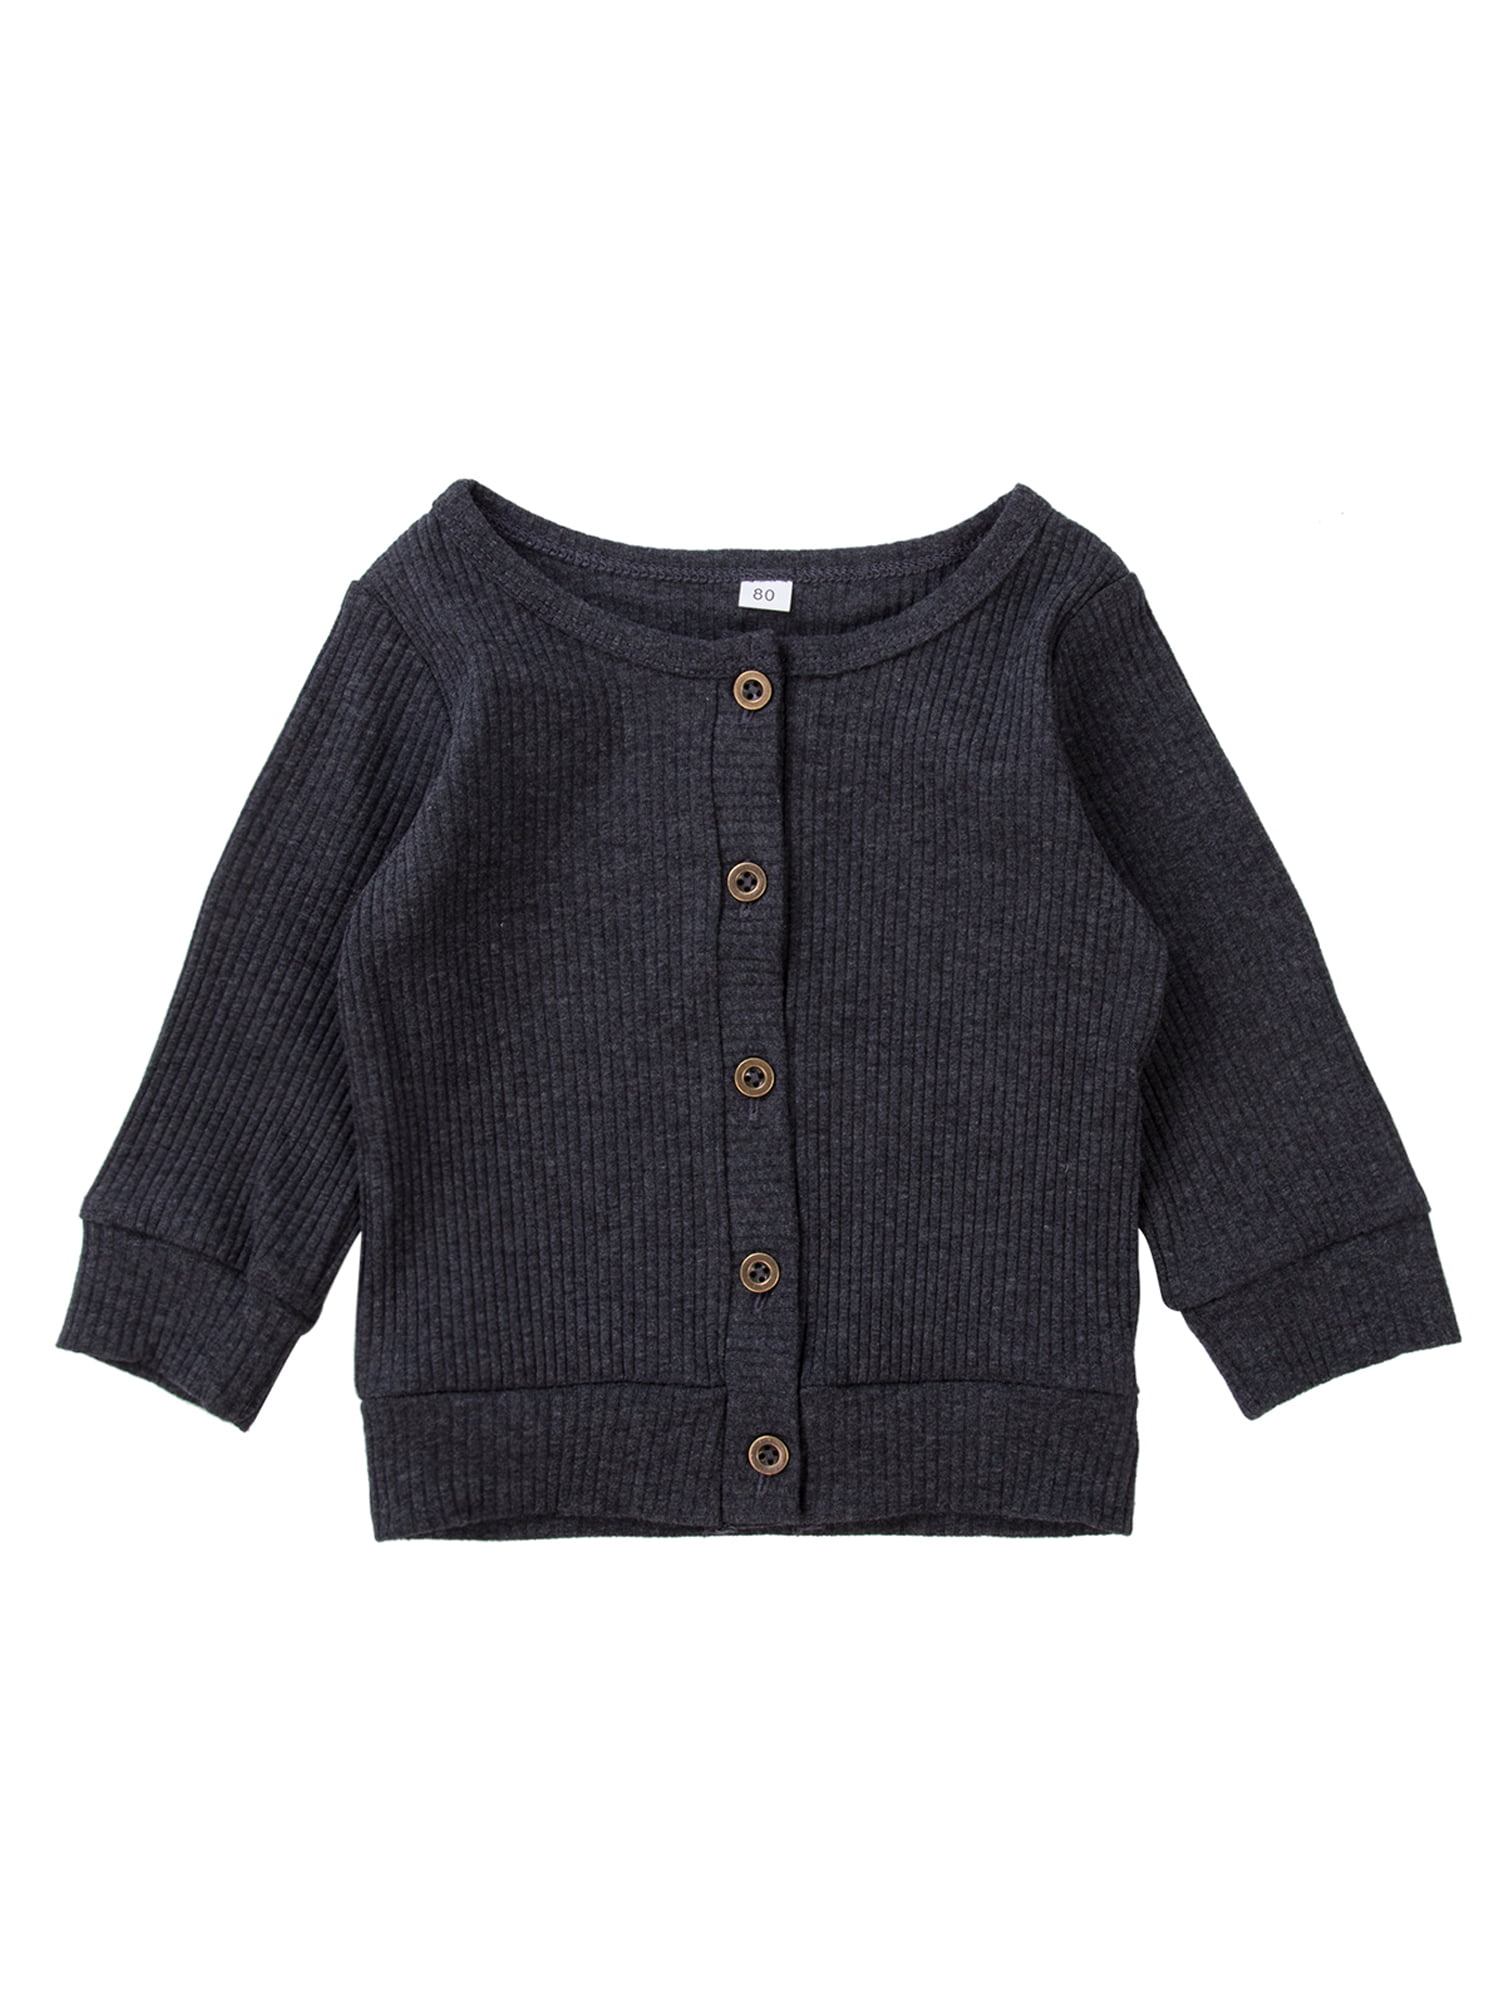 OCHENTA Boys Knitted Button Up Cotton Cardigan Sweater